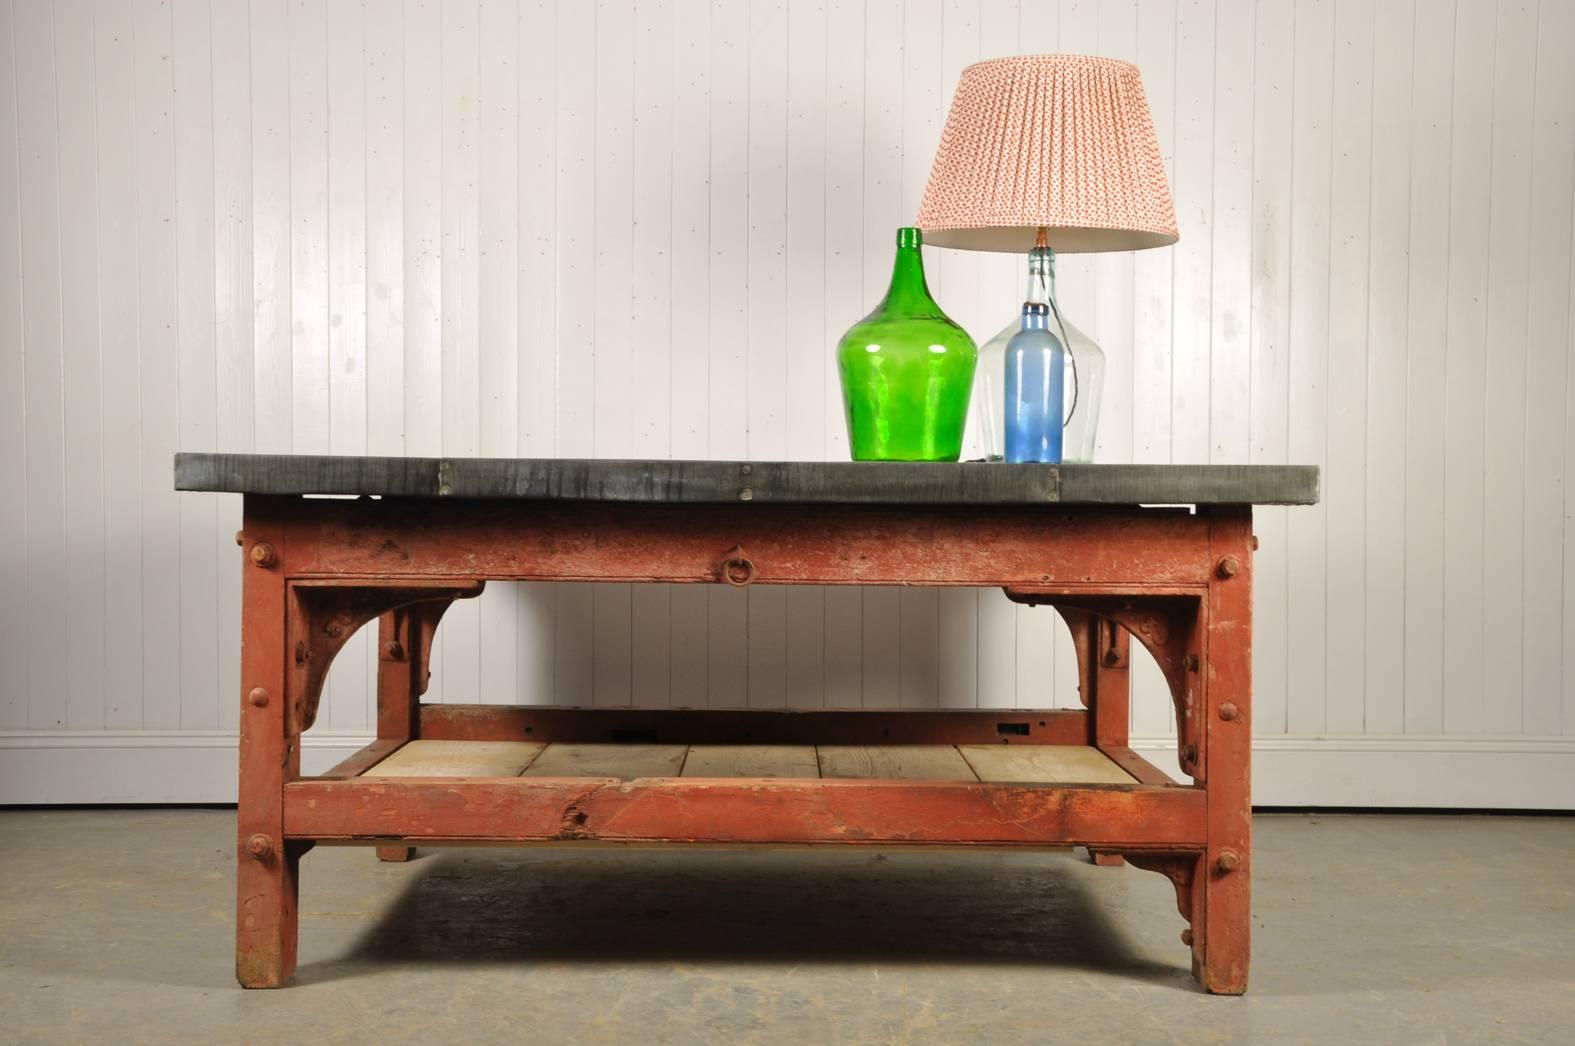 Very excited to have our hands on this stunning table. 

The oak base was originally sourced from a saw mill, it was part of a band saw, circa 1910. It retains most of its original red paint which has a wonderful patina and natural distressing.